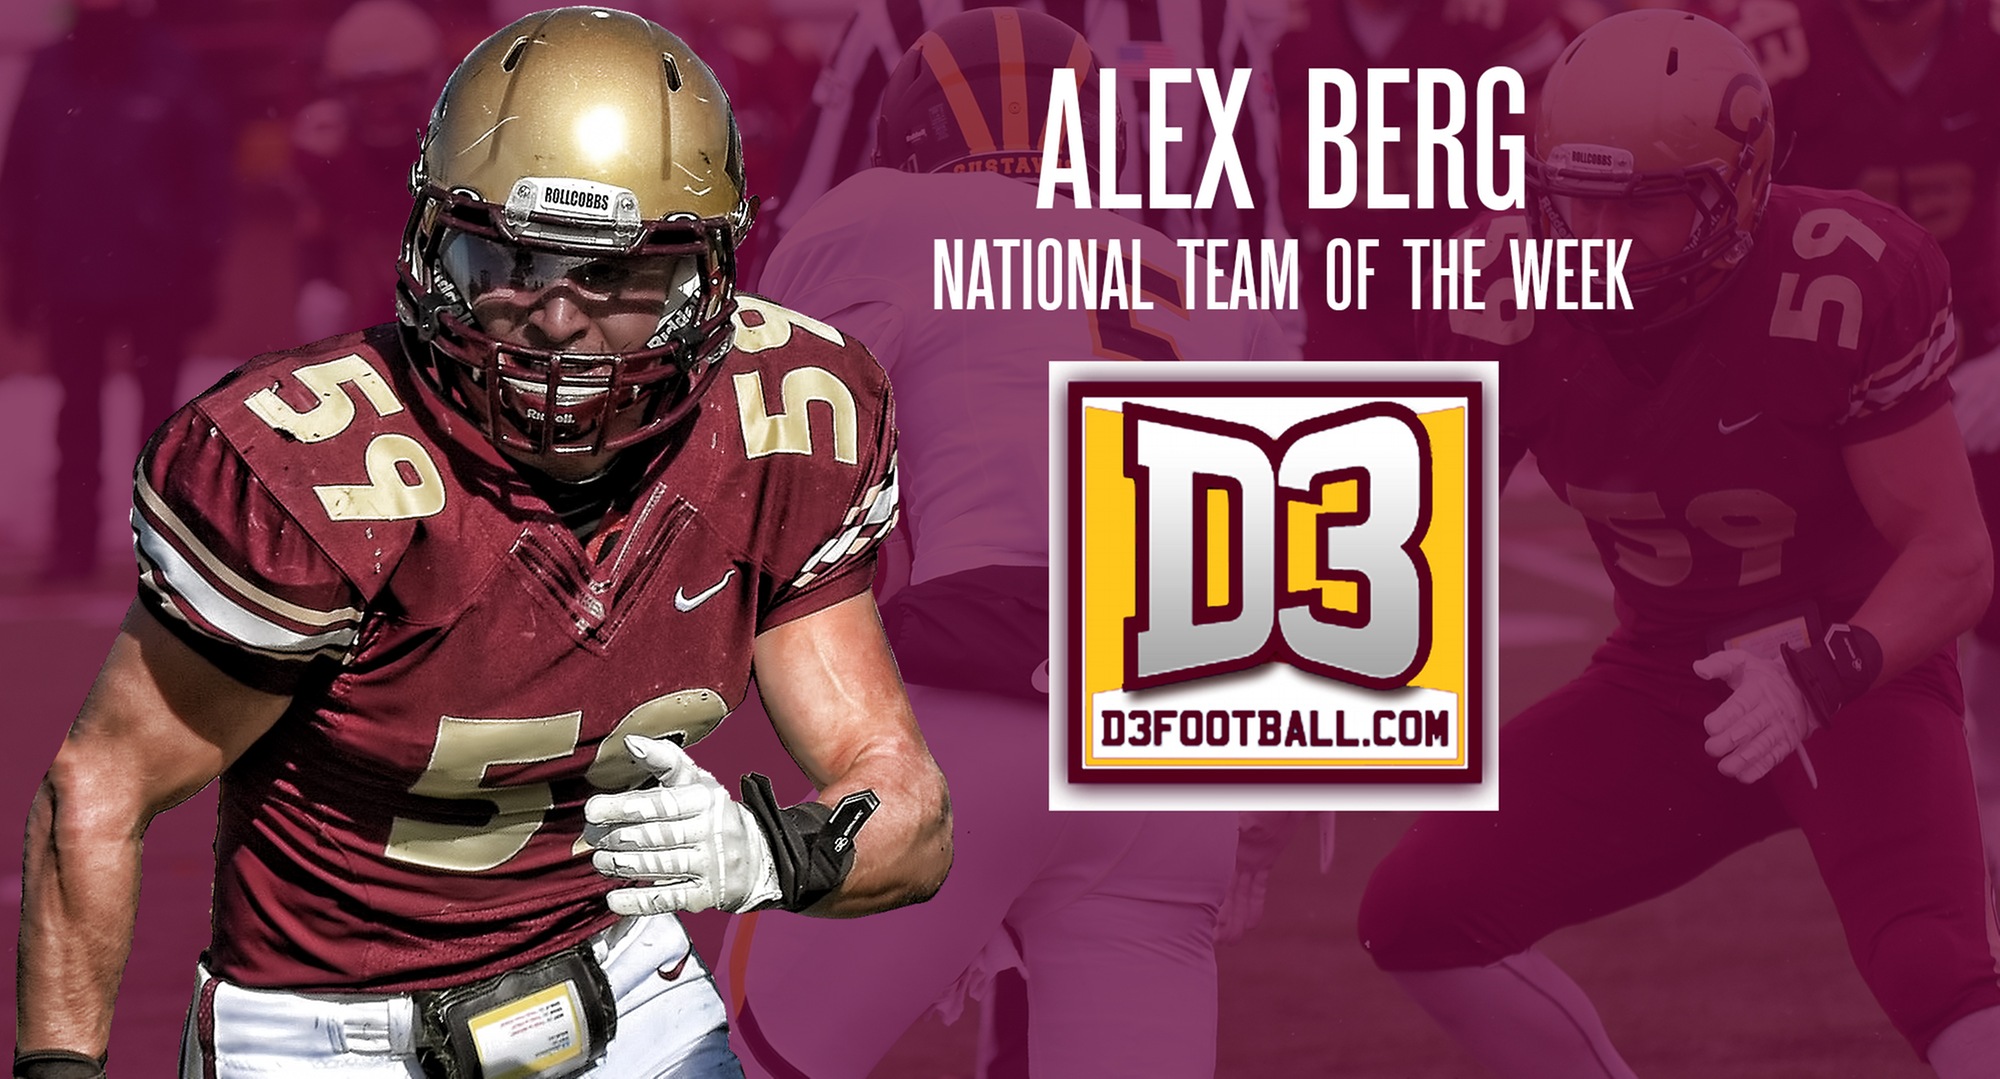 Alex Berg was named to the D3football.com National Team of the Week for his 16-tackles performance against St. Olaf.